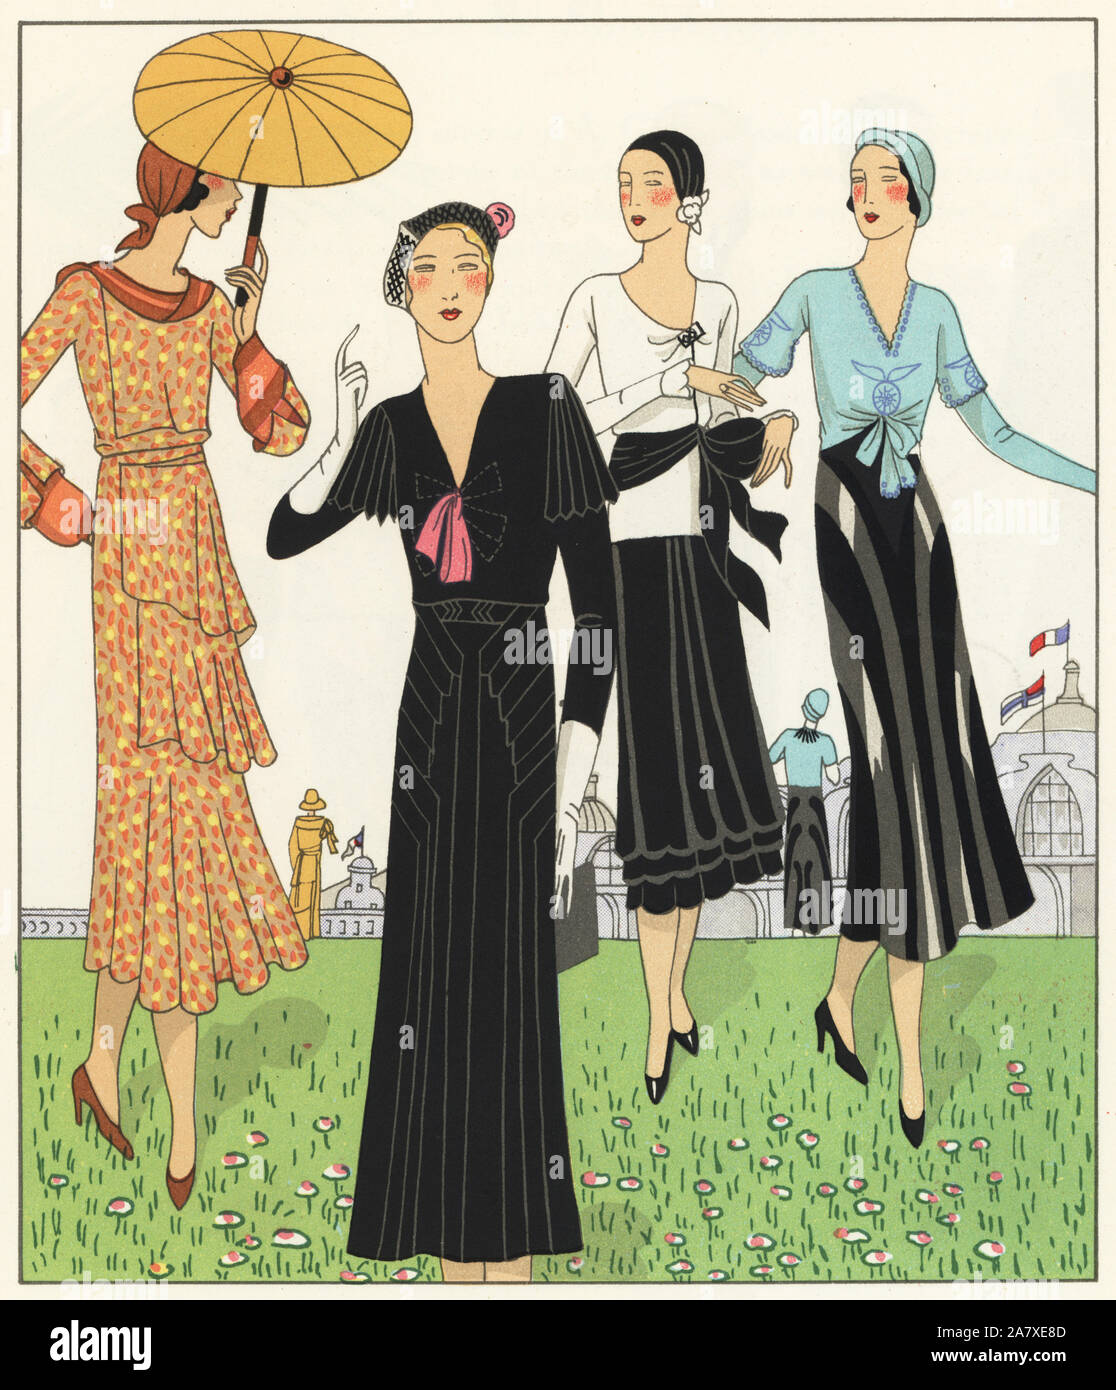 Woman in afternoon dress of printed crepe, woman in black afternoon dress of crepe de chine, woman in satin crepe ensemble, and woman in afternoon ensemble of blouse and skirt in satin crepe. Handcolored pochoir (stencil) lithograph from the French luxury fashion magazine Art, Gout, Beaute, 1931. Stock Photo